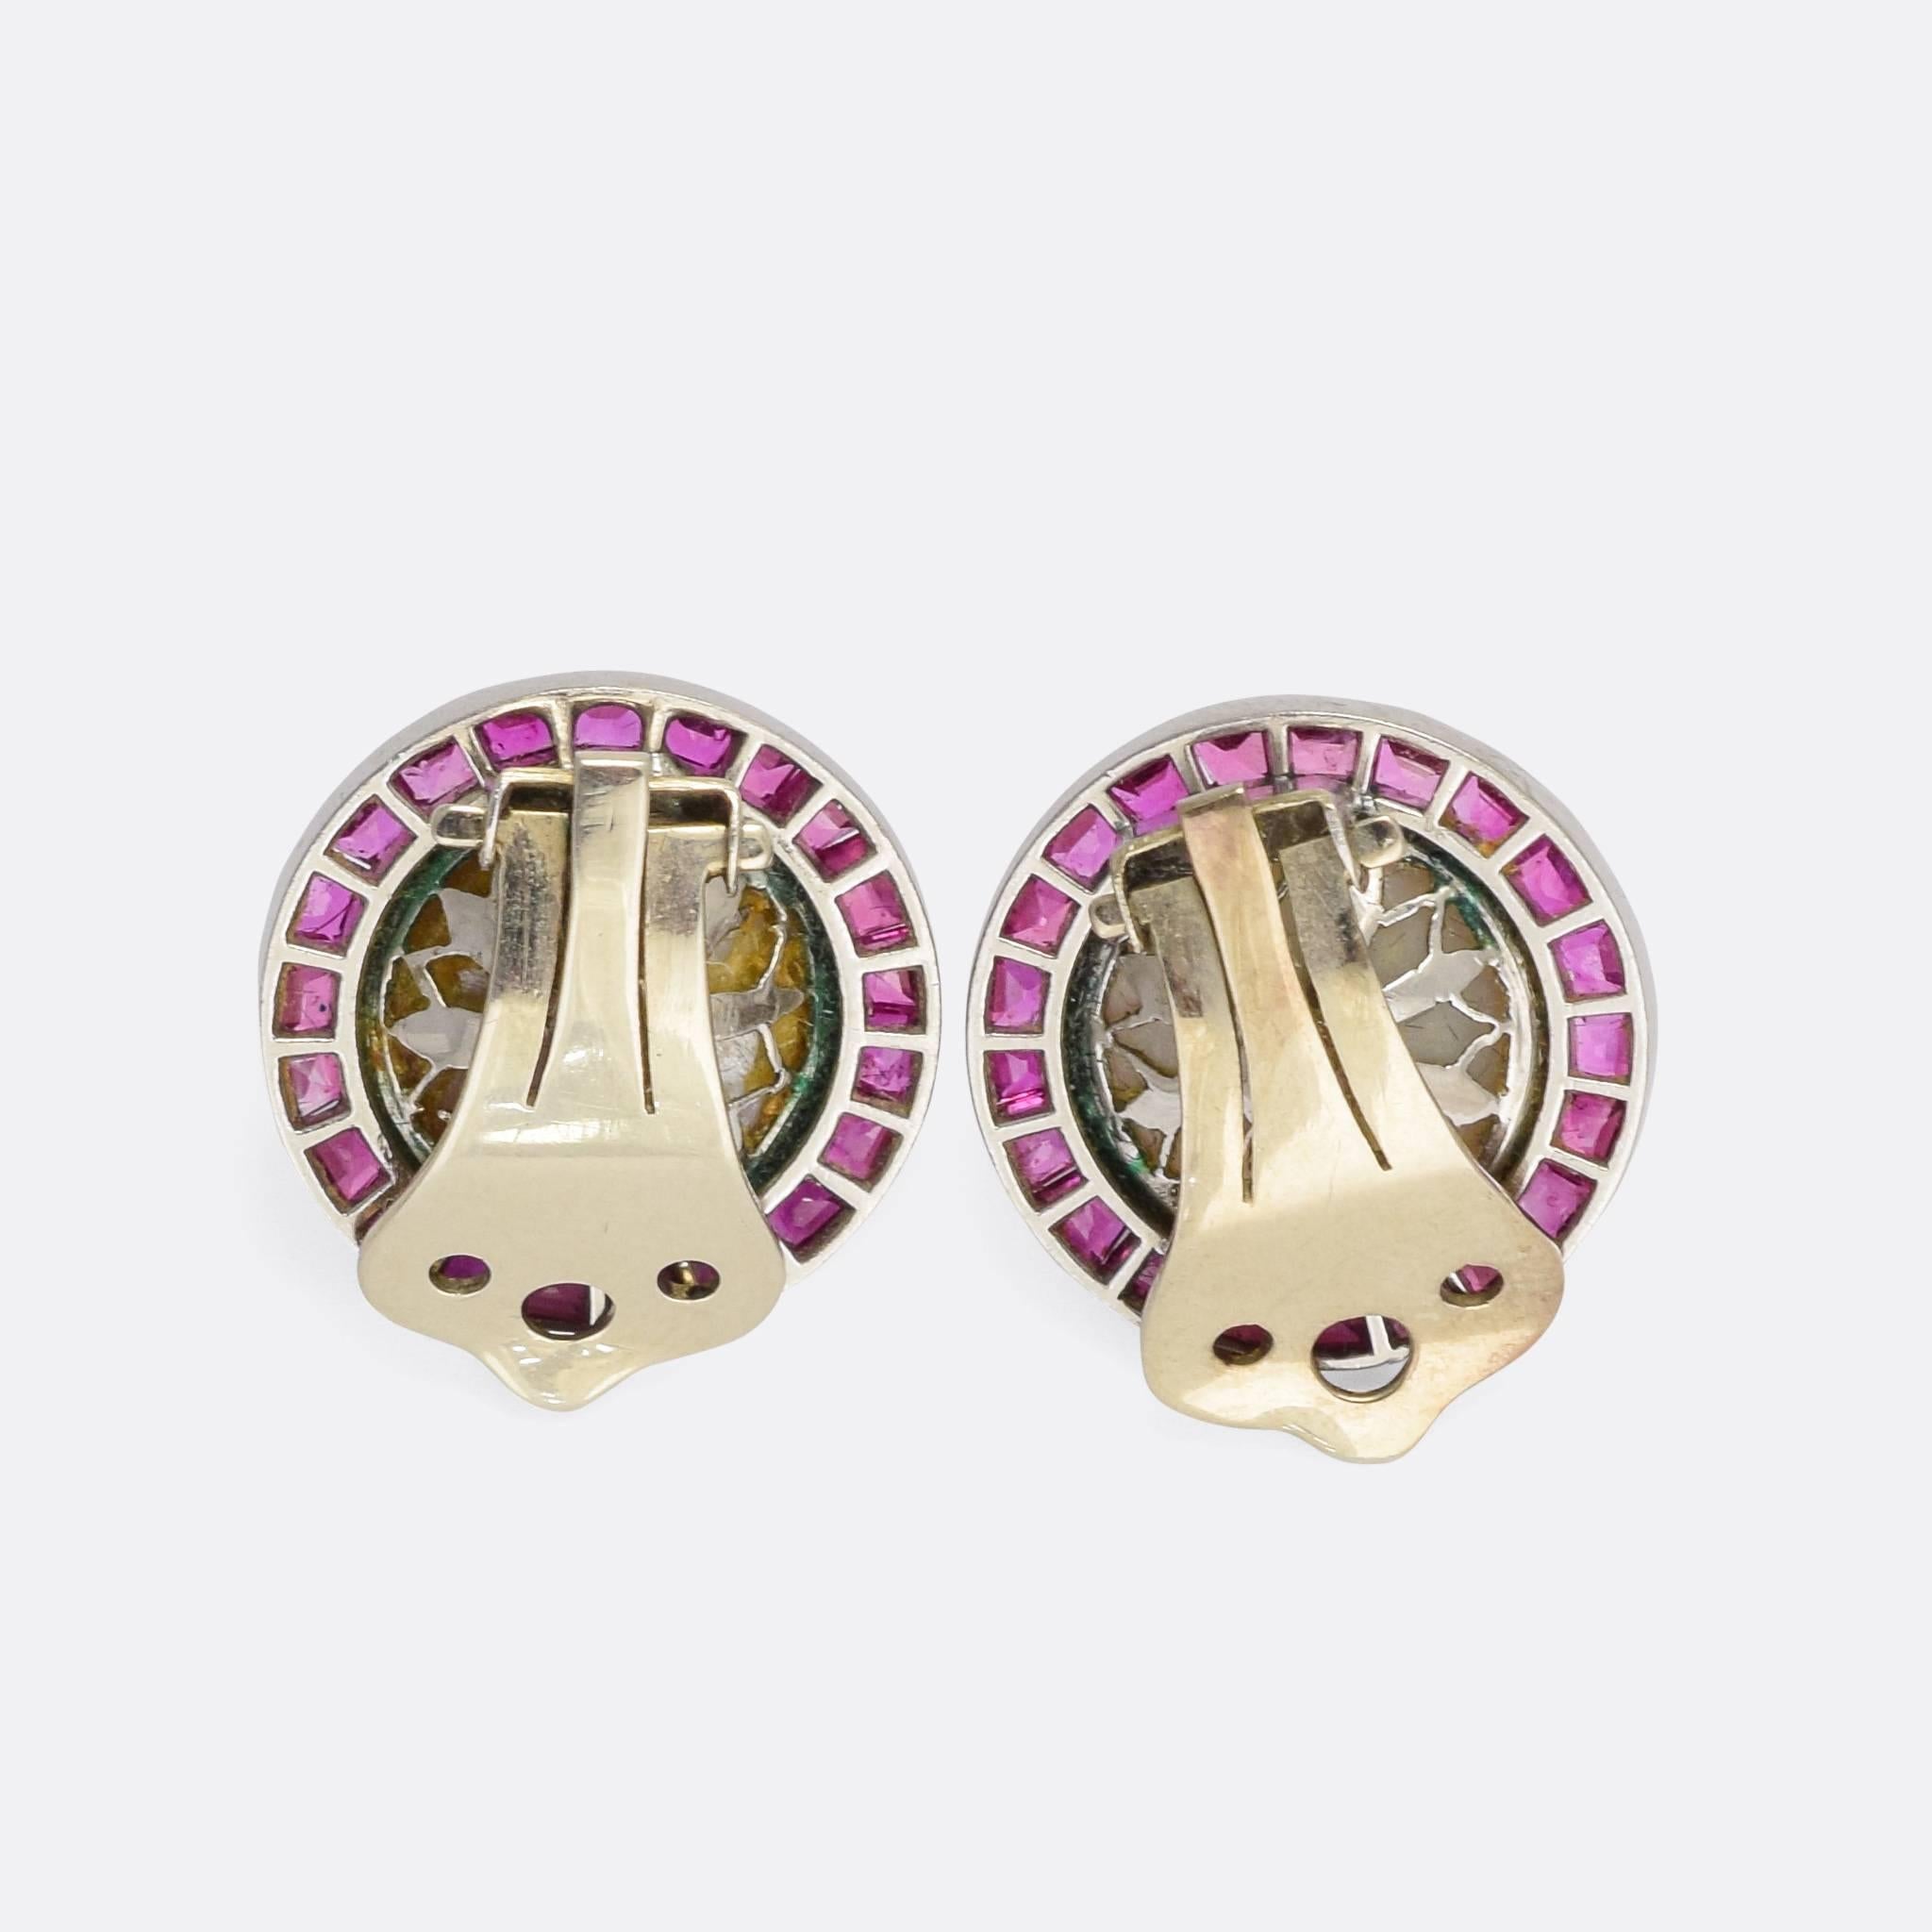 A spectacular pair of vintage clip-on earrings, each one set with a mabe pearl within a halo of calibré cut rubies. The stones are set in platinum, the rubies are bright and vibrant, and the pearls display excellent coloured lustre. A stunning pair